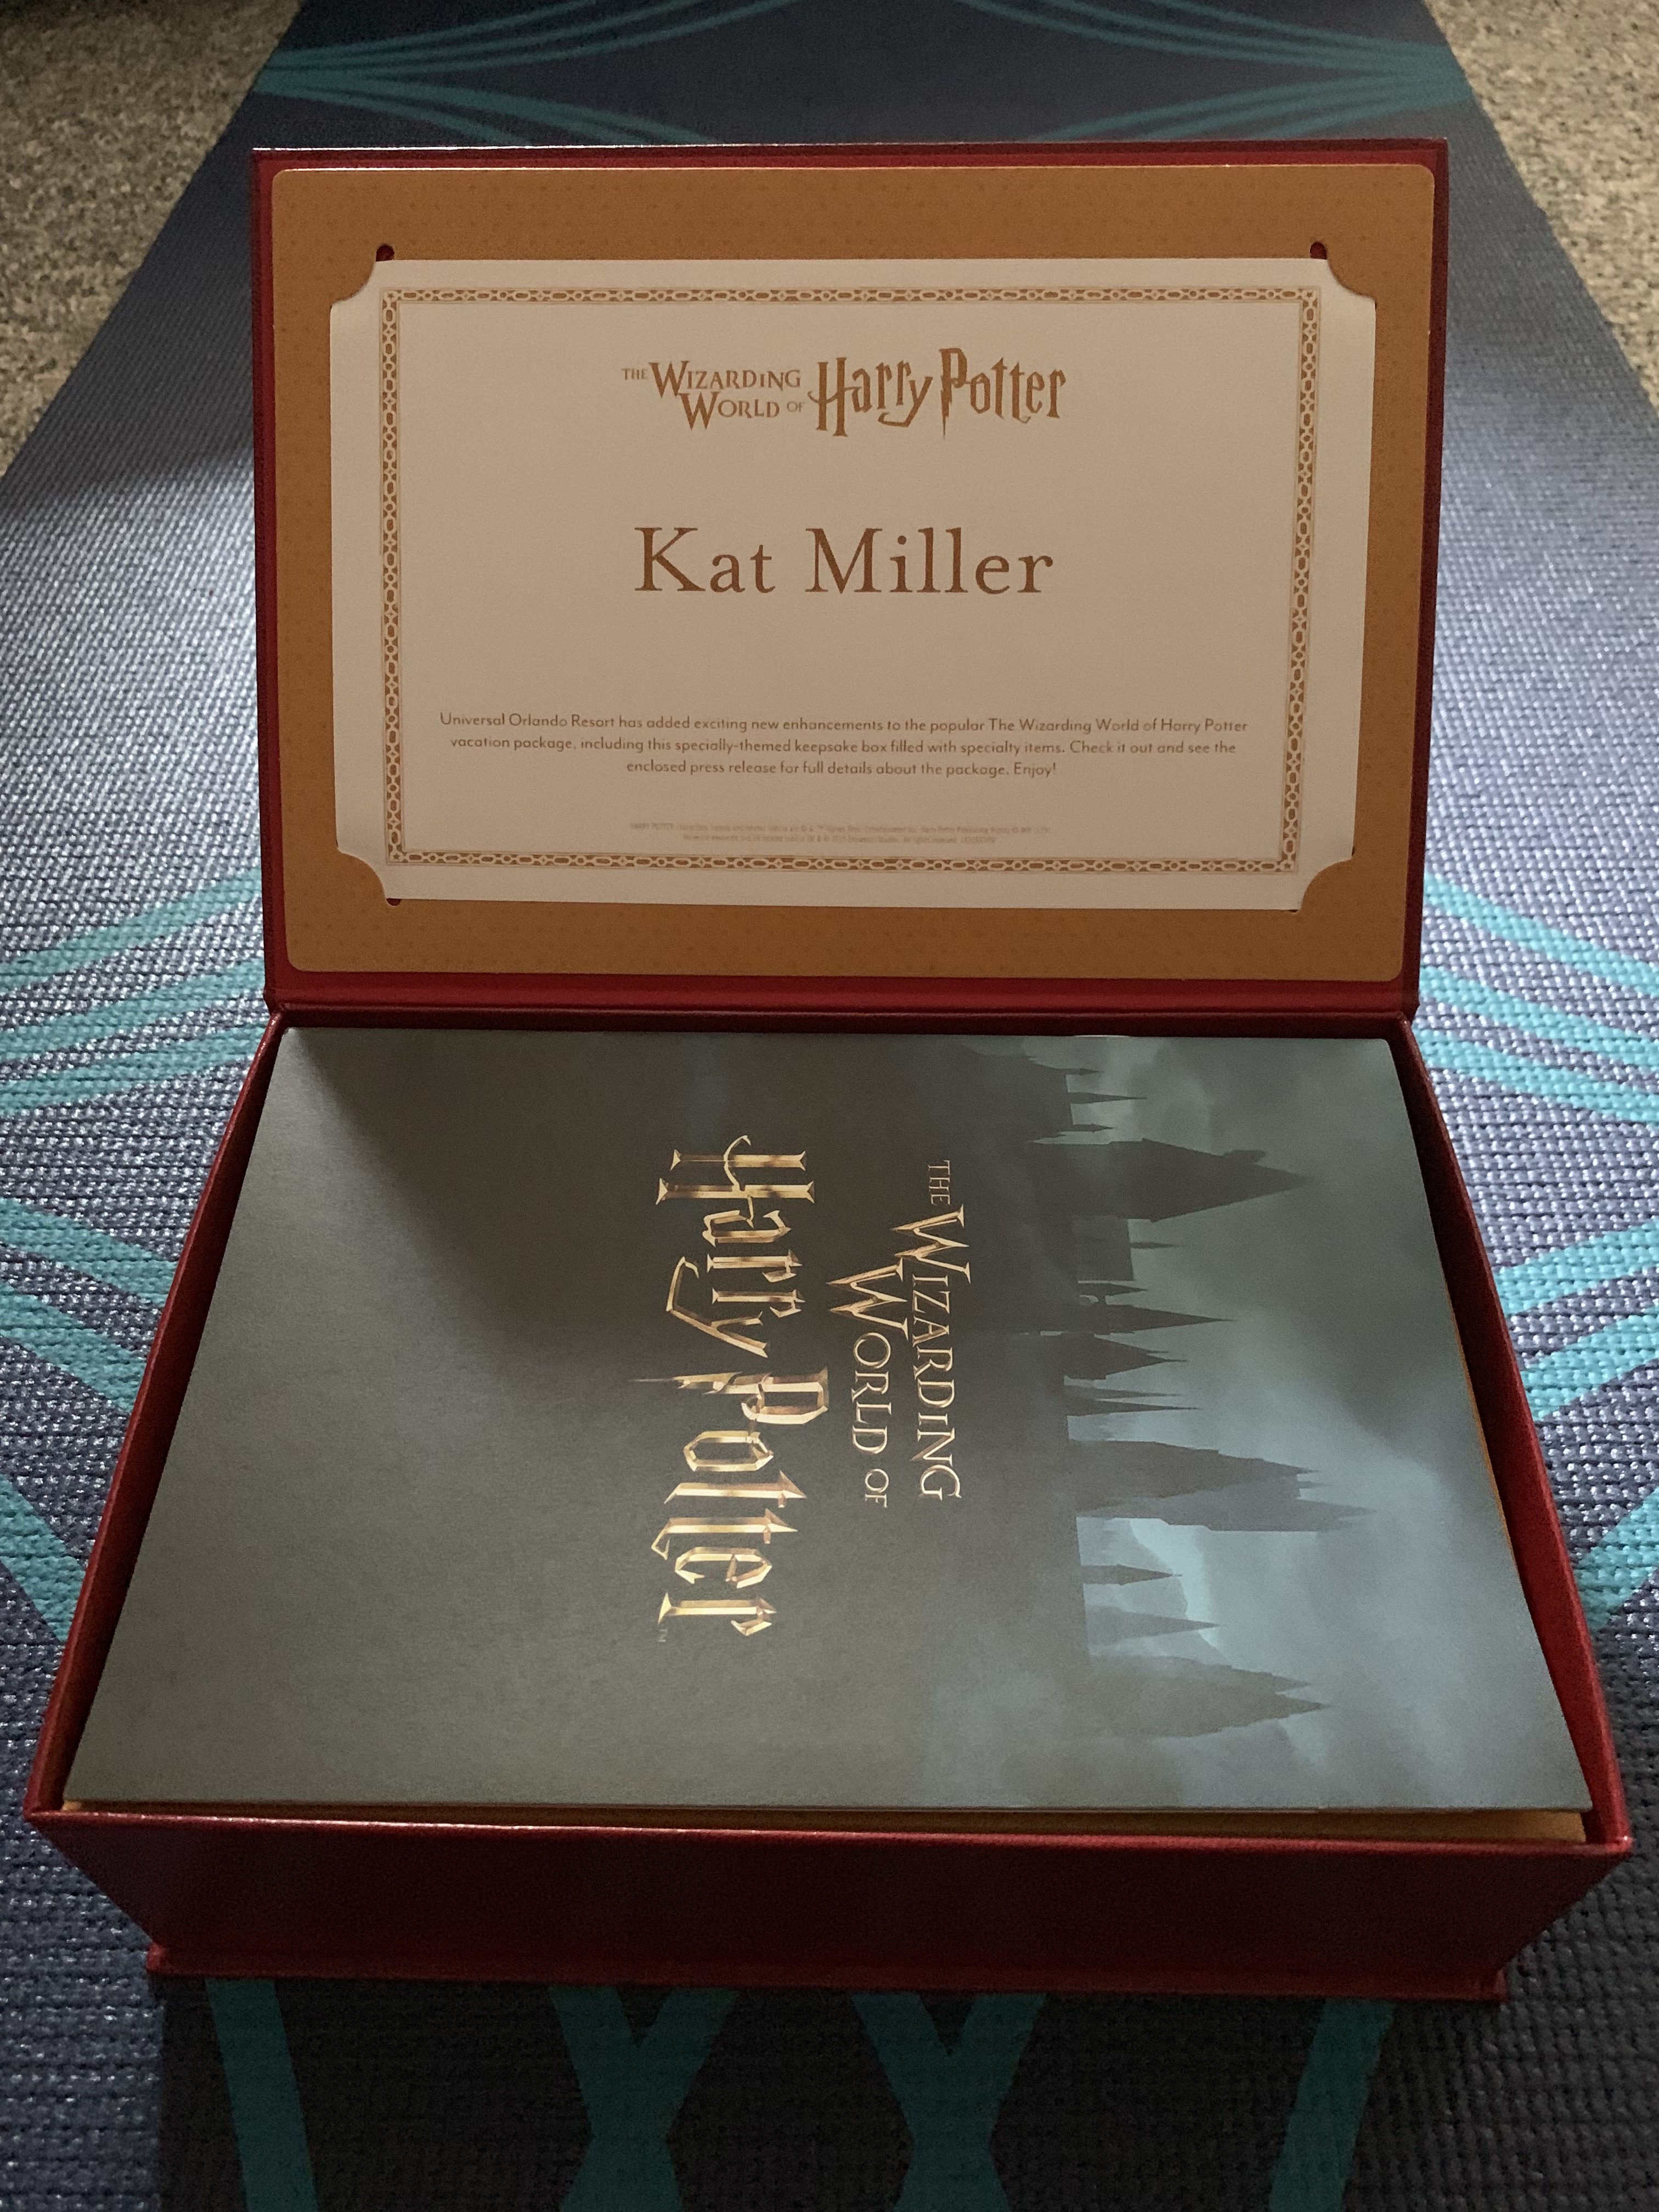 Your “Wizarding World of Harry Potter Exclusive Vacation Package” will include a personalized welcome letter.